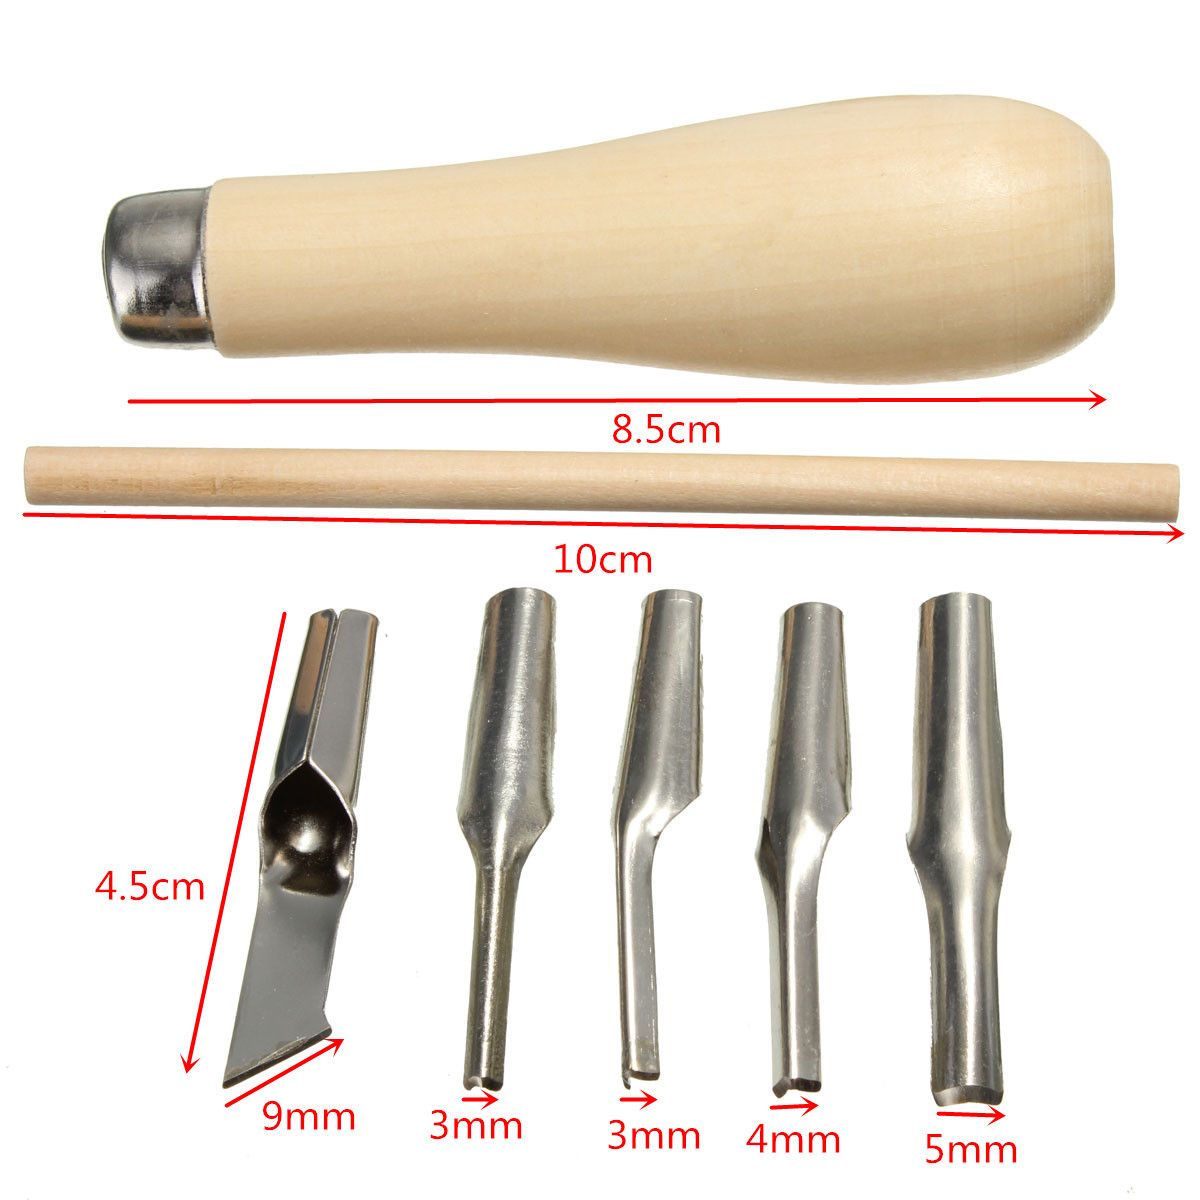 Lino-Block-Cutting-Rubber-Stamp-Carving-Tools-With-5-Blade-Bits-For-Print-Making-1039212